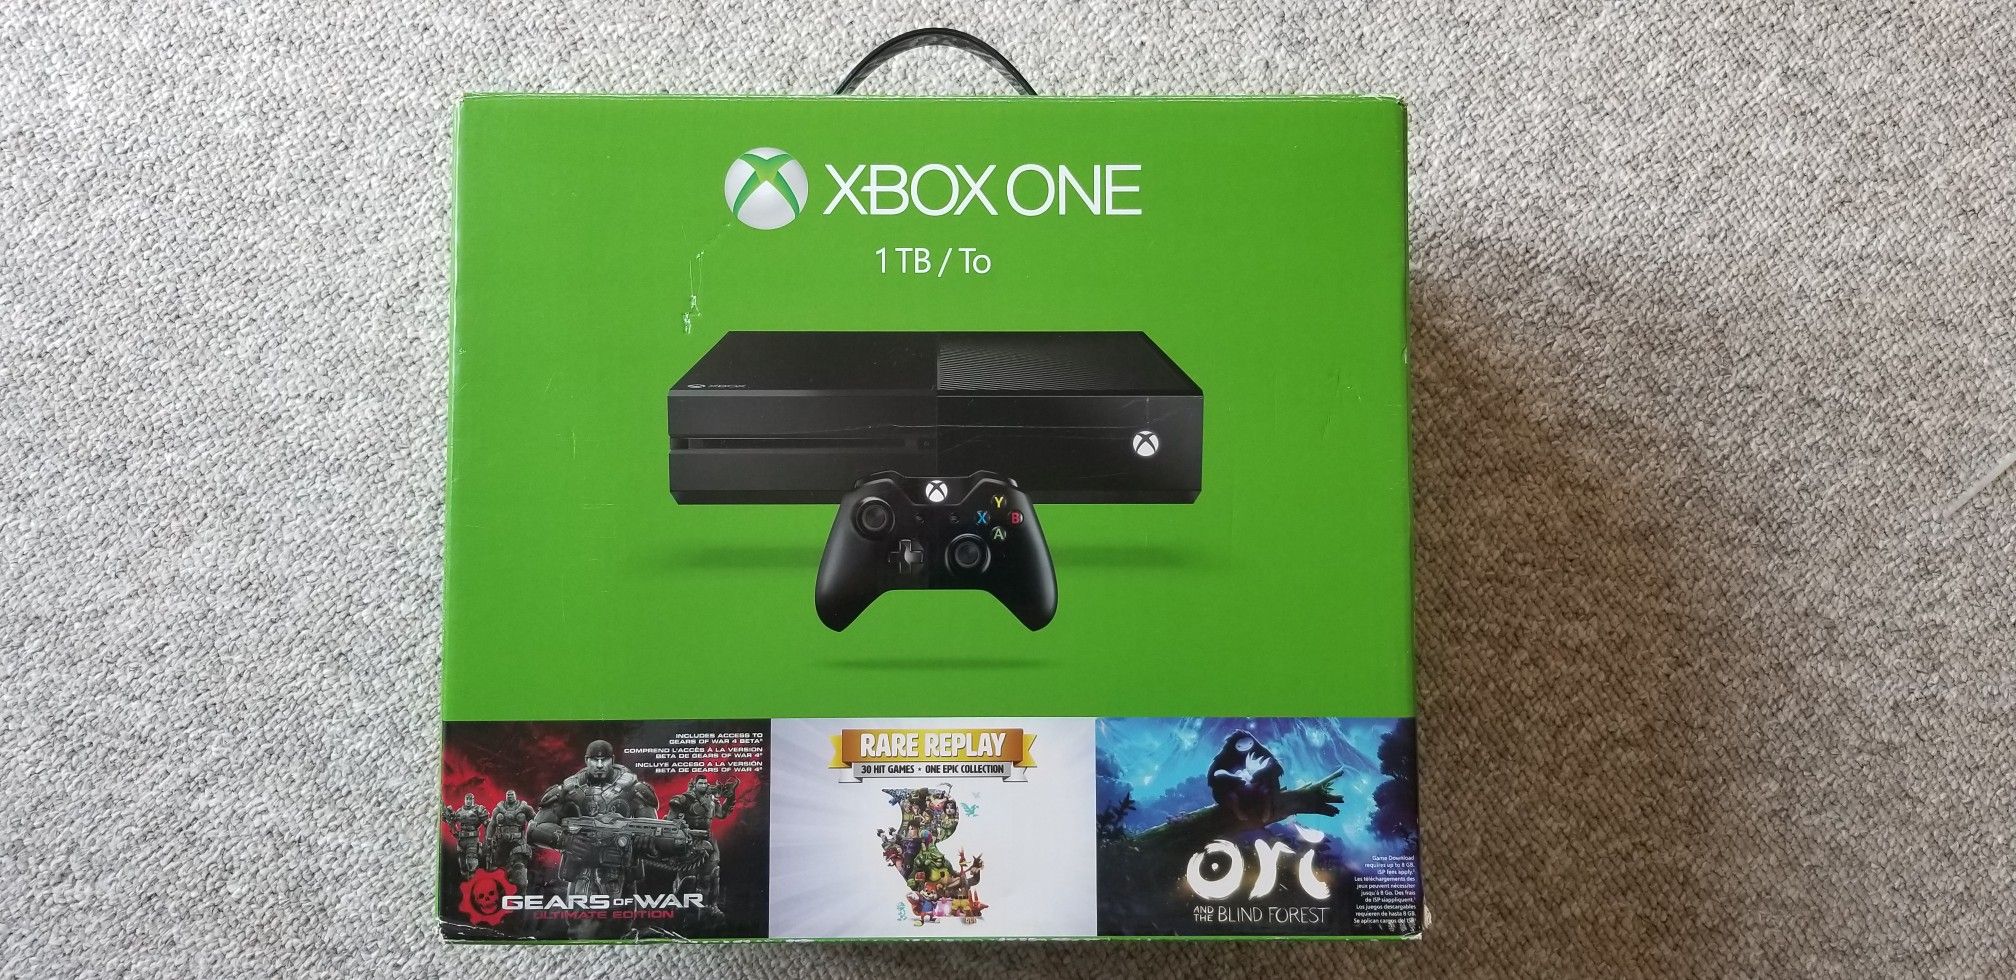 XBox One 1TB (2 controllers)